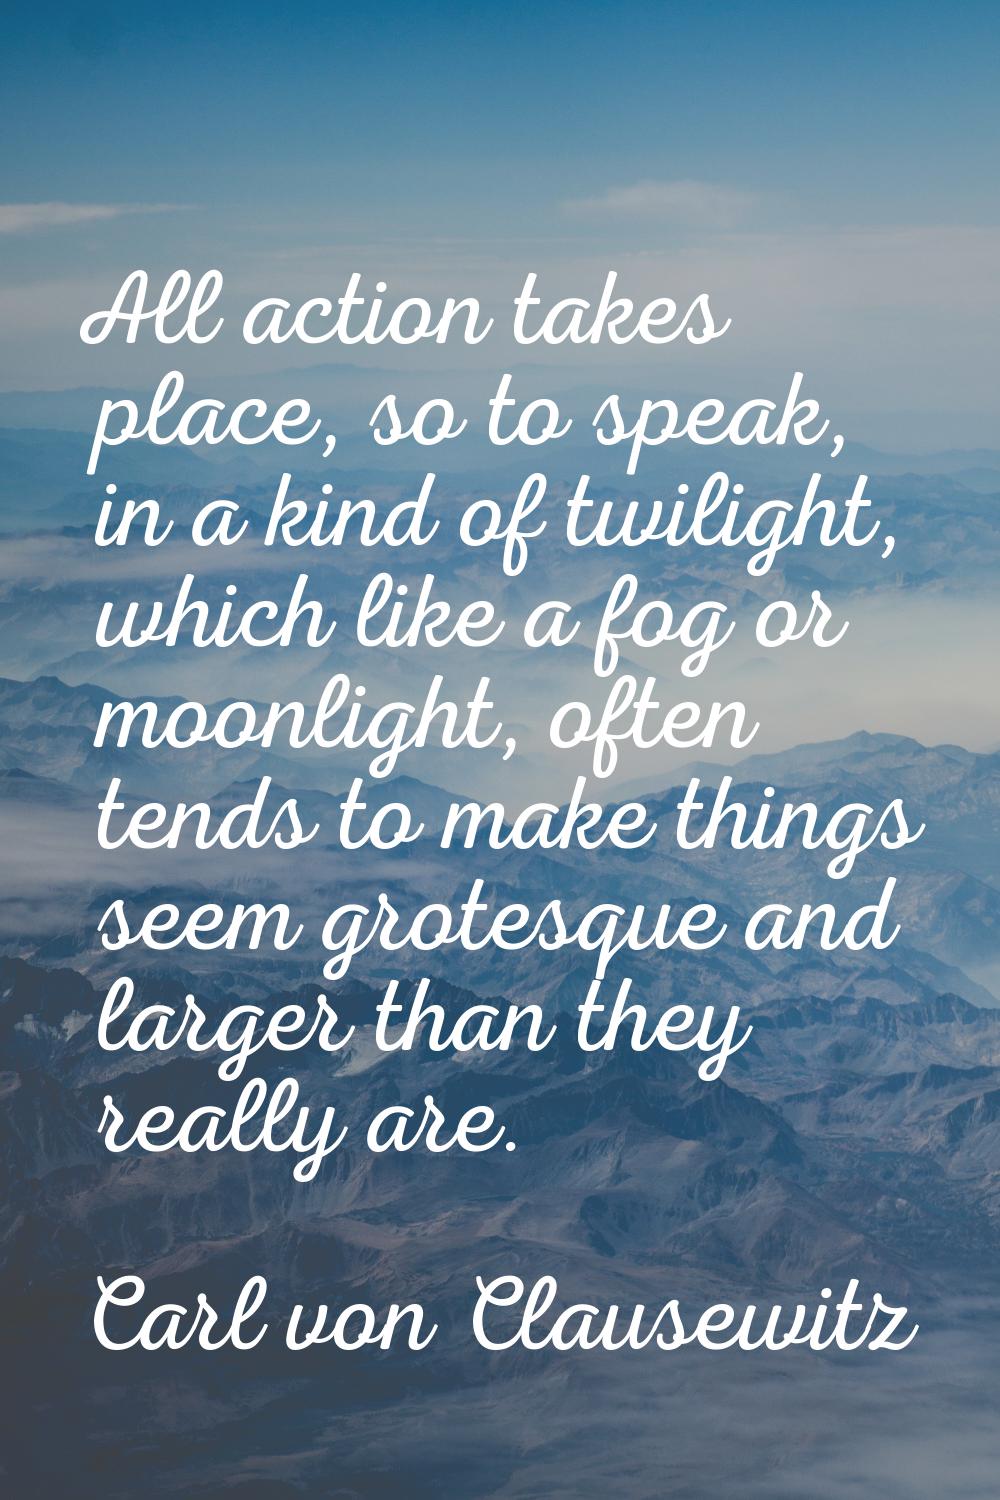 All action takes place, so to speak, in a kind of twilight, which like a fog or moonlight, often te